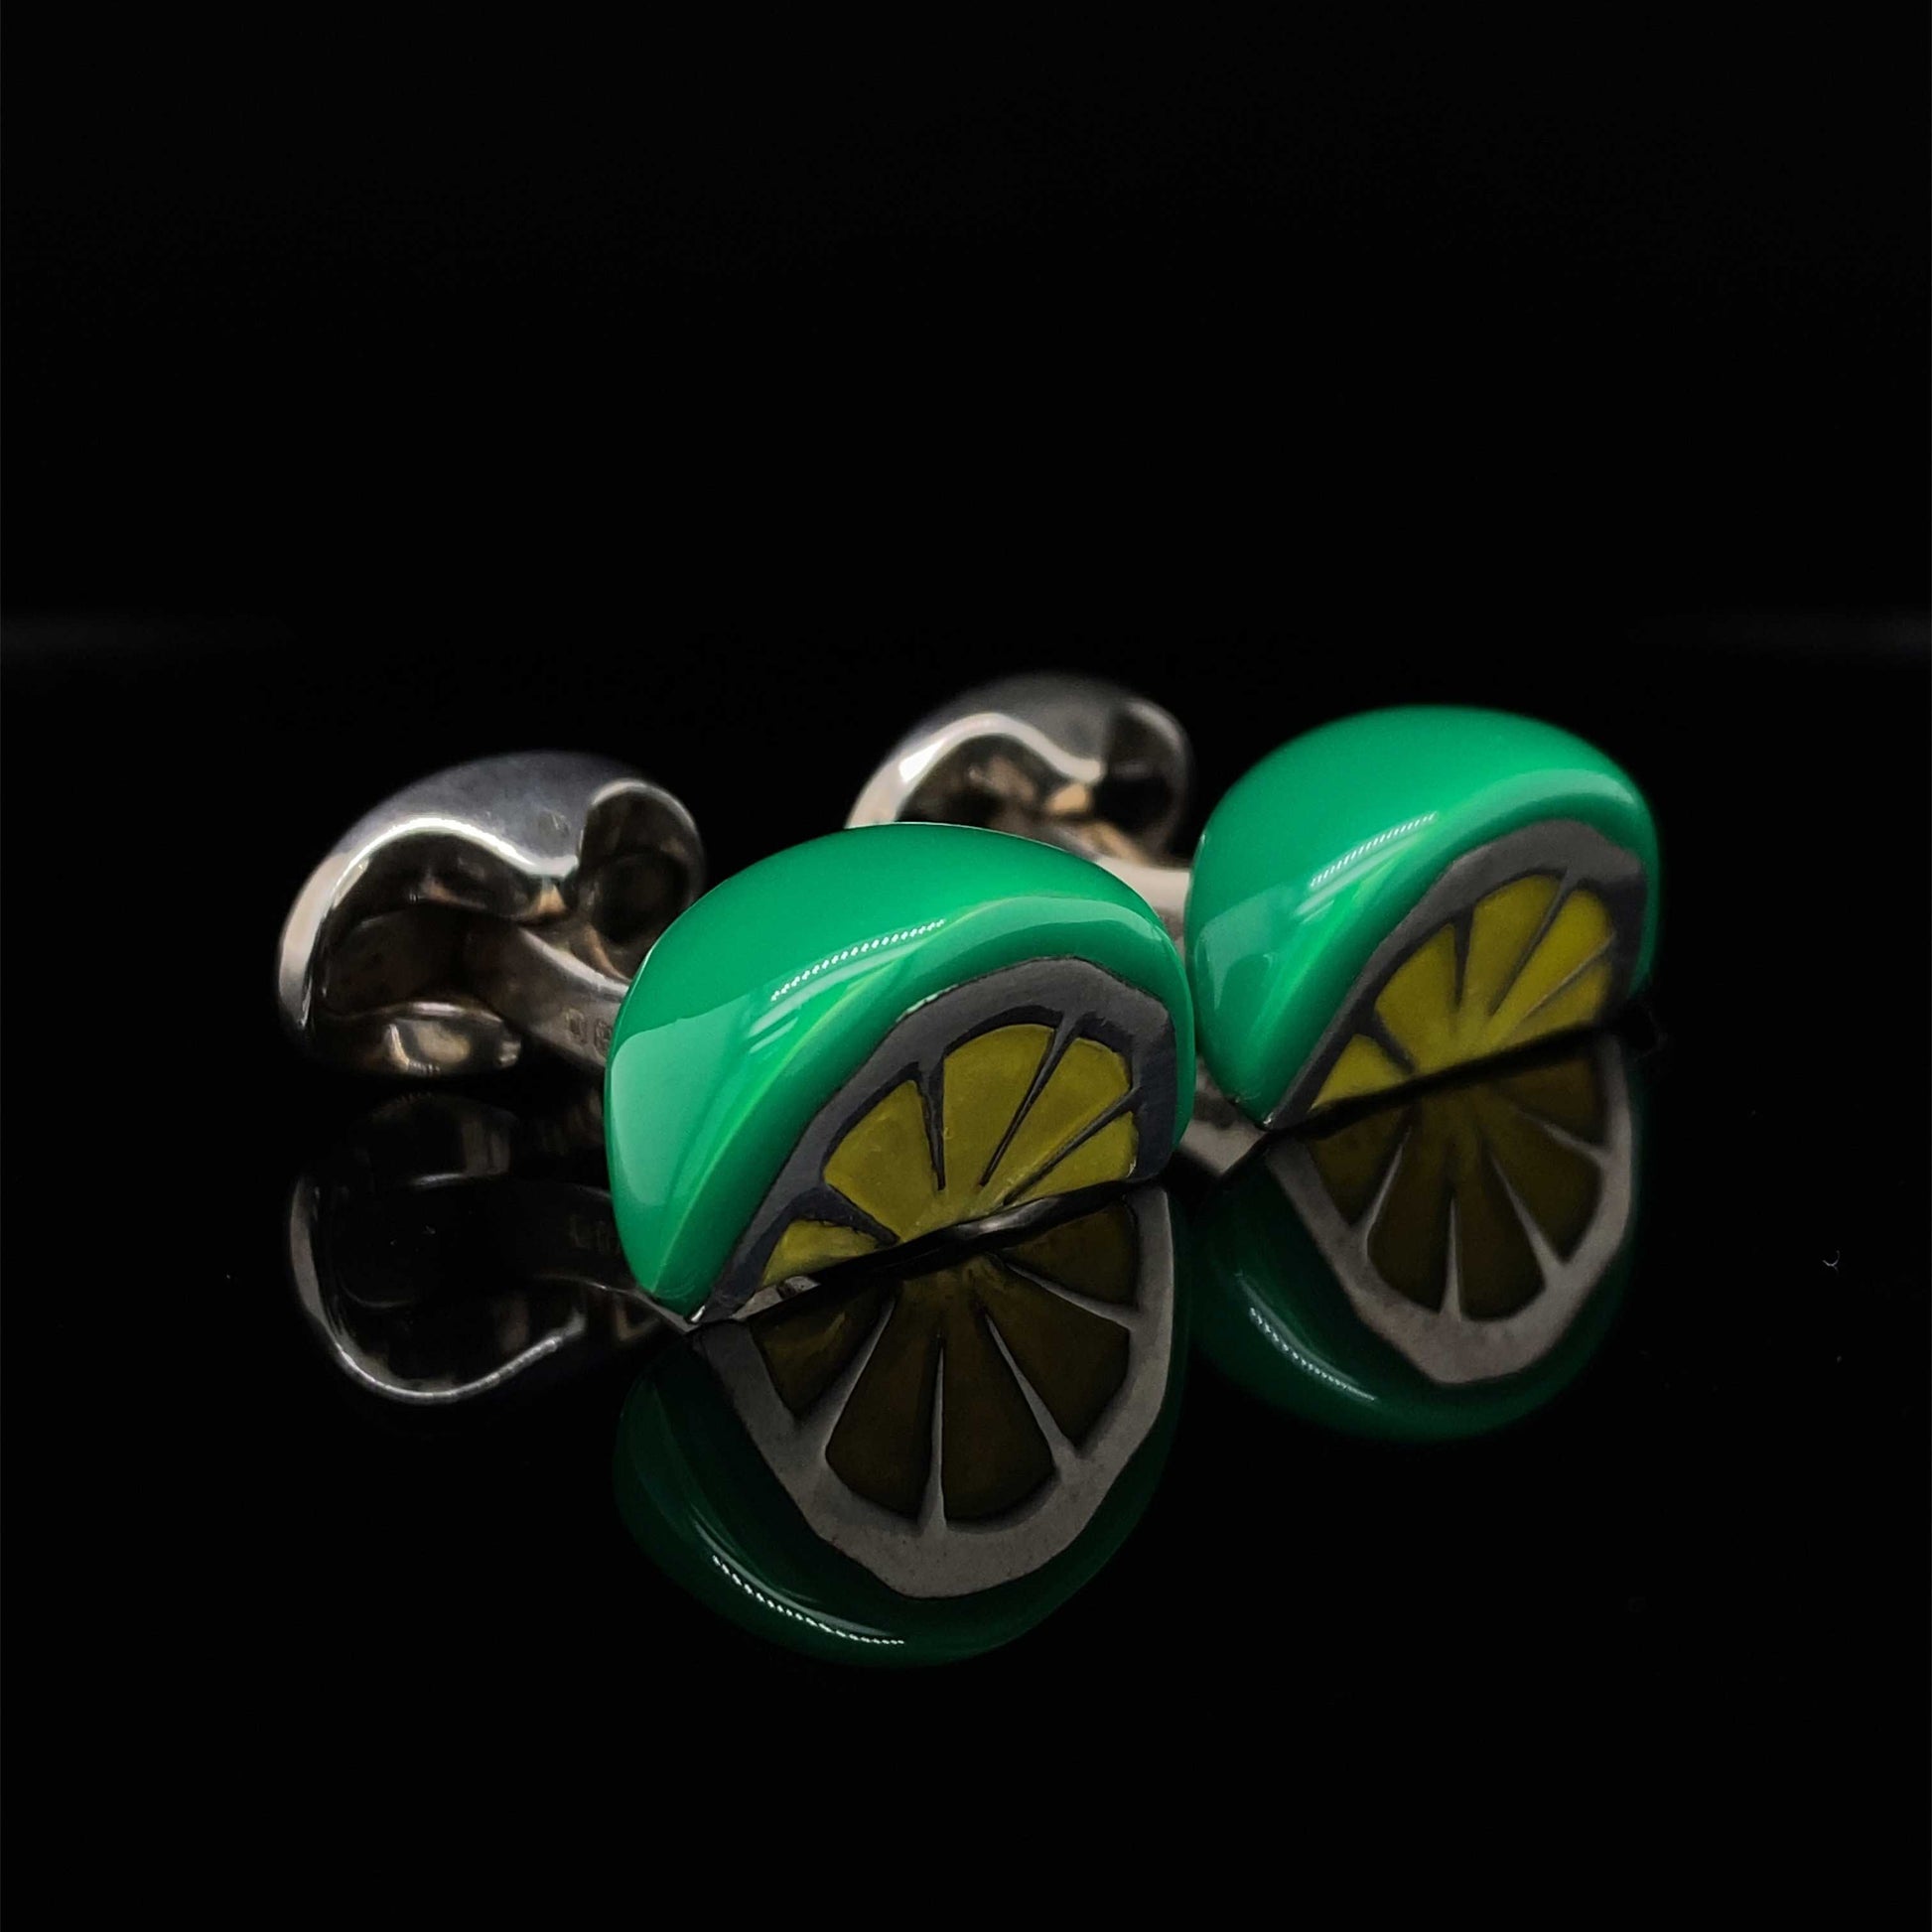 Silver and Enamel Lime Slice Cufflinks